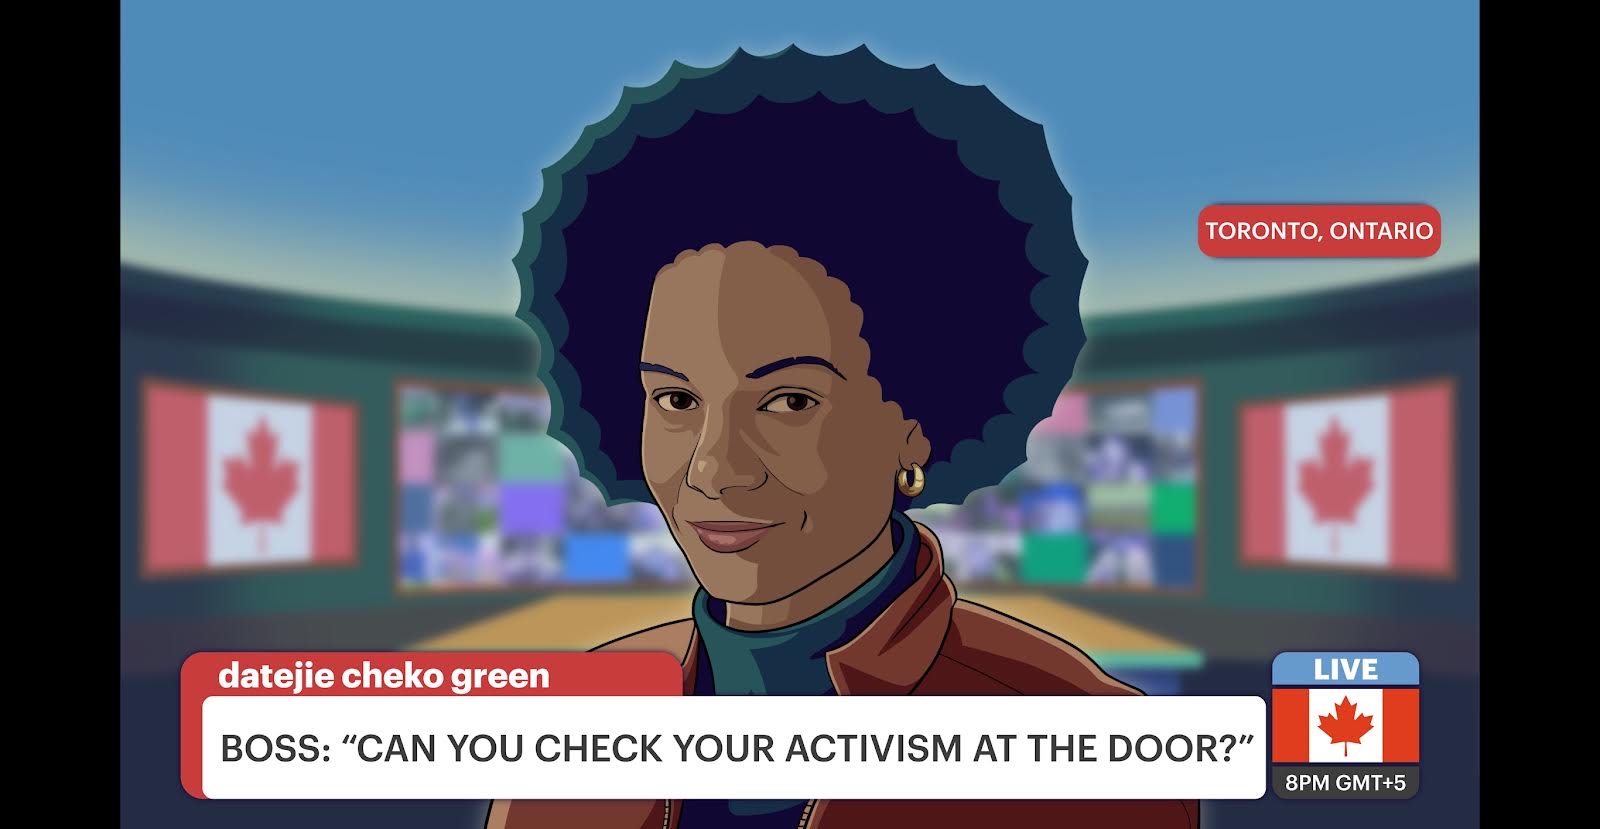 Can you check your activism at the door?